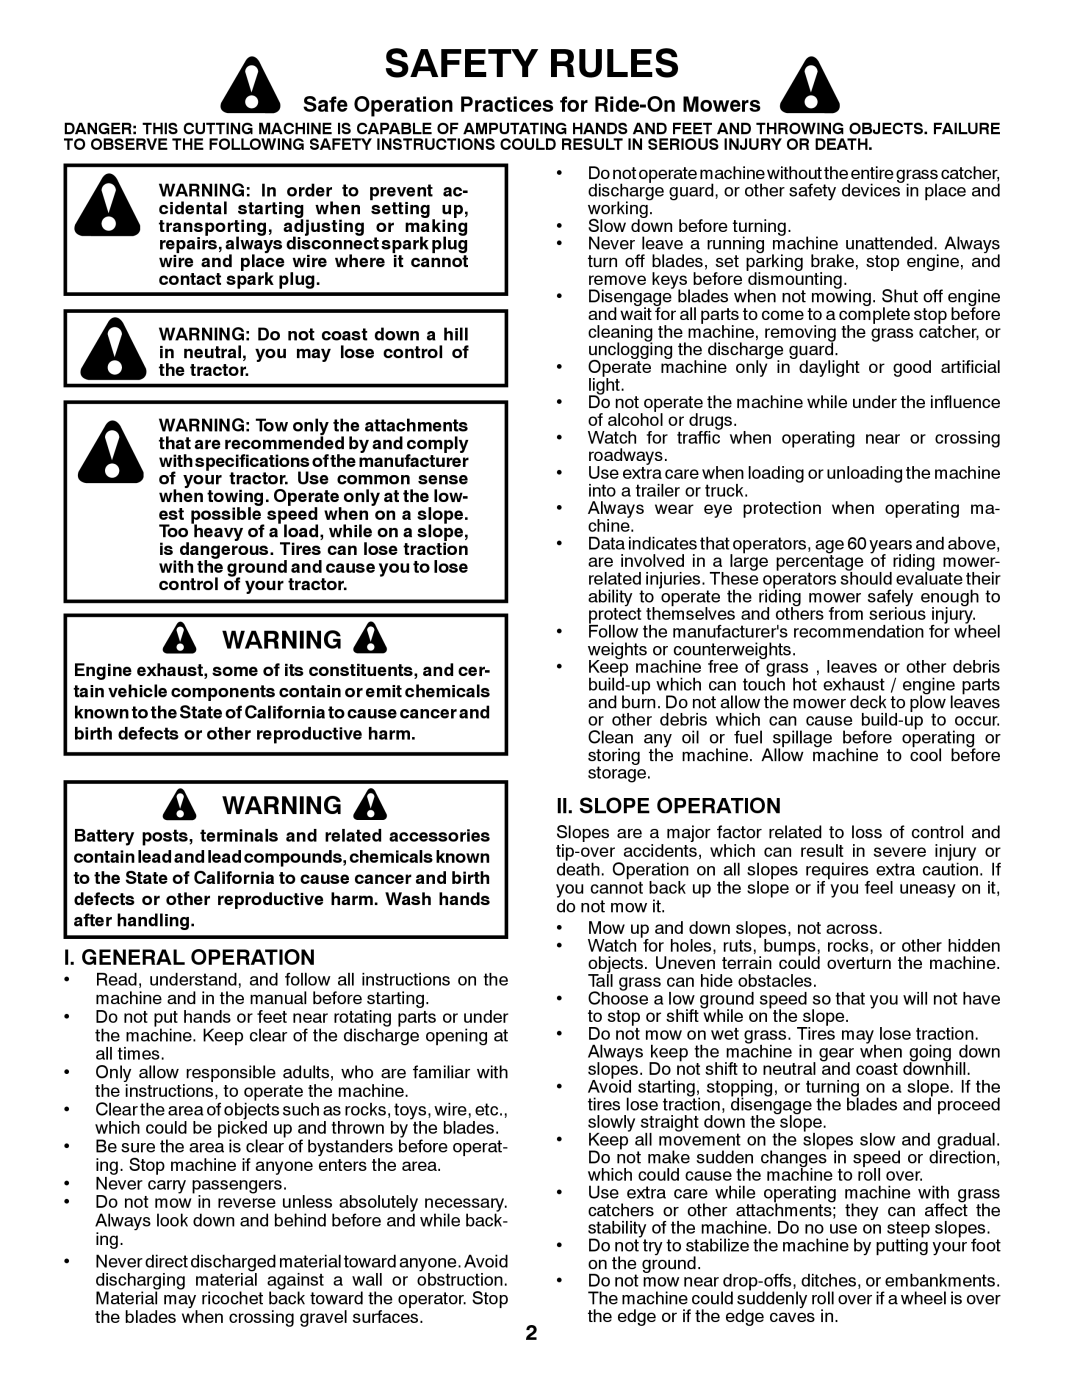 Husqvarna 96045000409 Safety Rules, Safe Operation Practices for Ride-On Mowers, I. General Operation, Ii. Slope Operation 